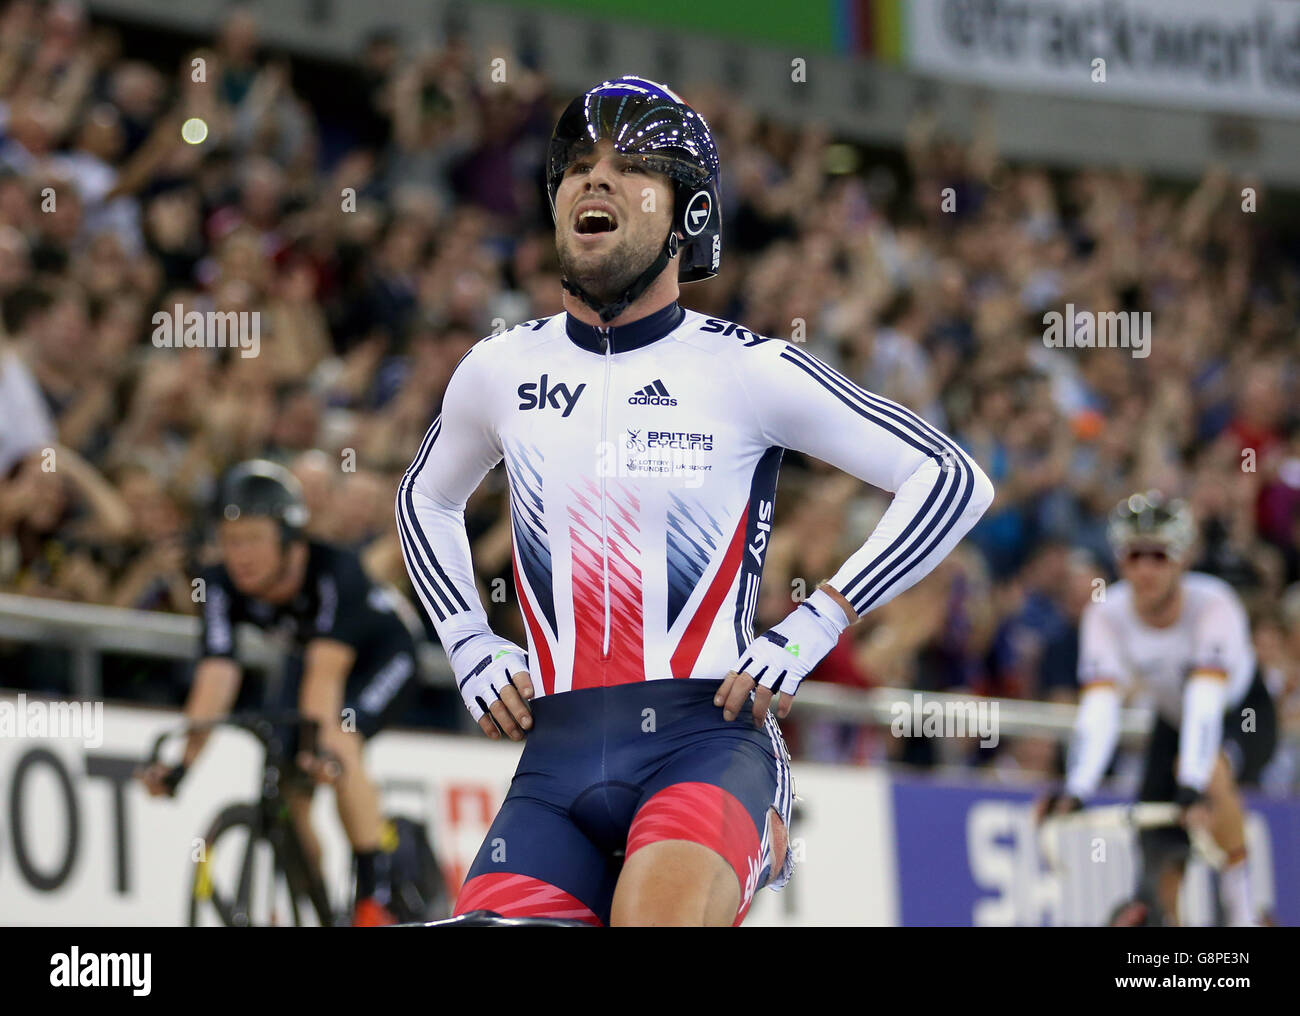 Great Britain's Mark Cavendish celebrates after winning the Men's Madison during day five of the UCI Track Cycling World Championships at Lee Valley VeloPark, London. Stock Photo